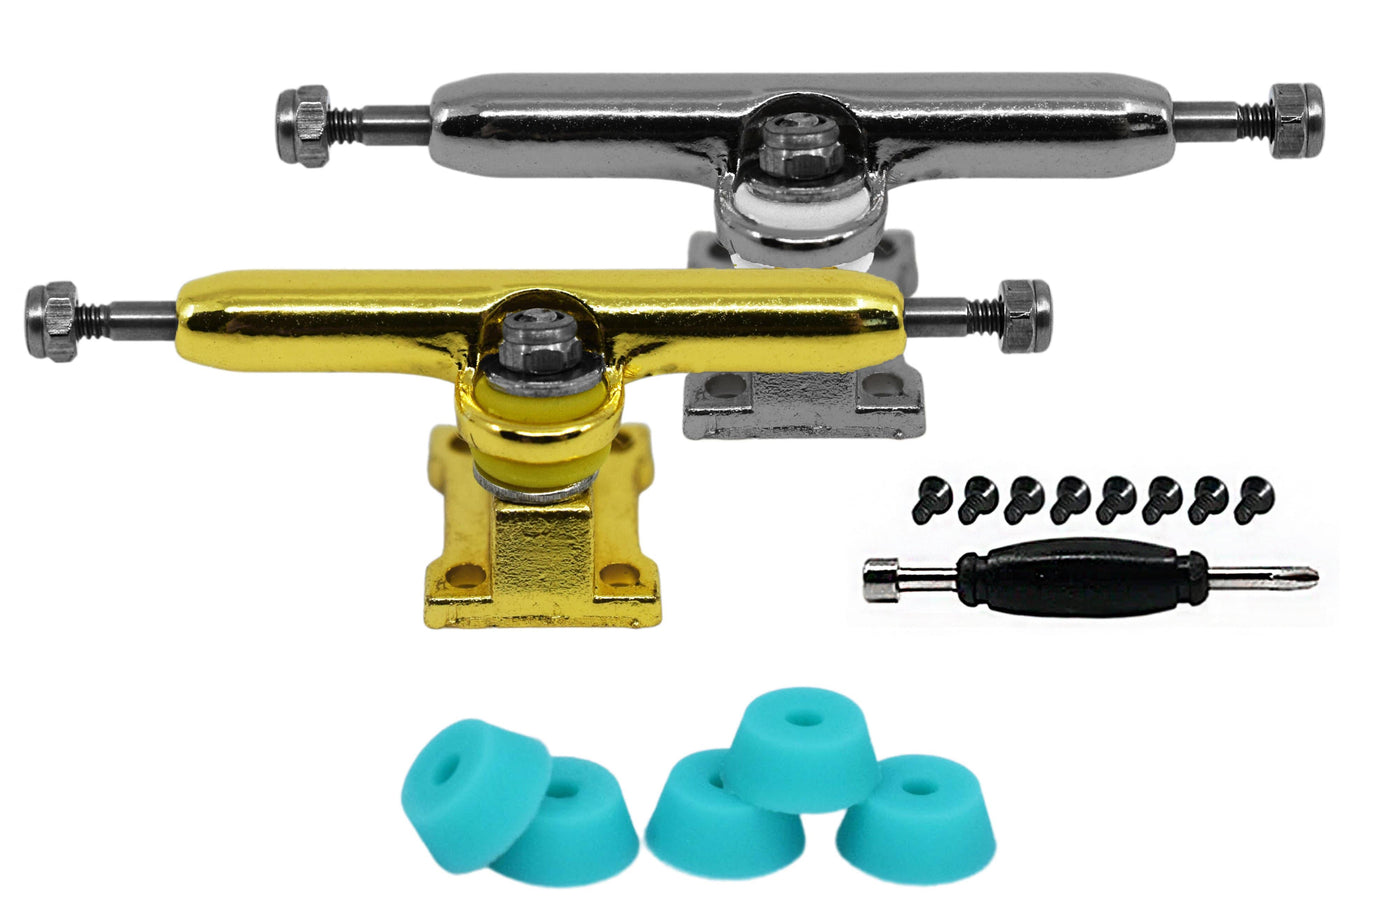 Teak Tuning Fingerboard Prodigy Pro Trucks with Upgraded Tuning, "Sweet Charity" - Gold & Silver - 34mm Width - Includes Free 61A Pro Duro Bubble Bushings in Teak Teal